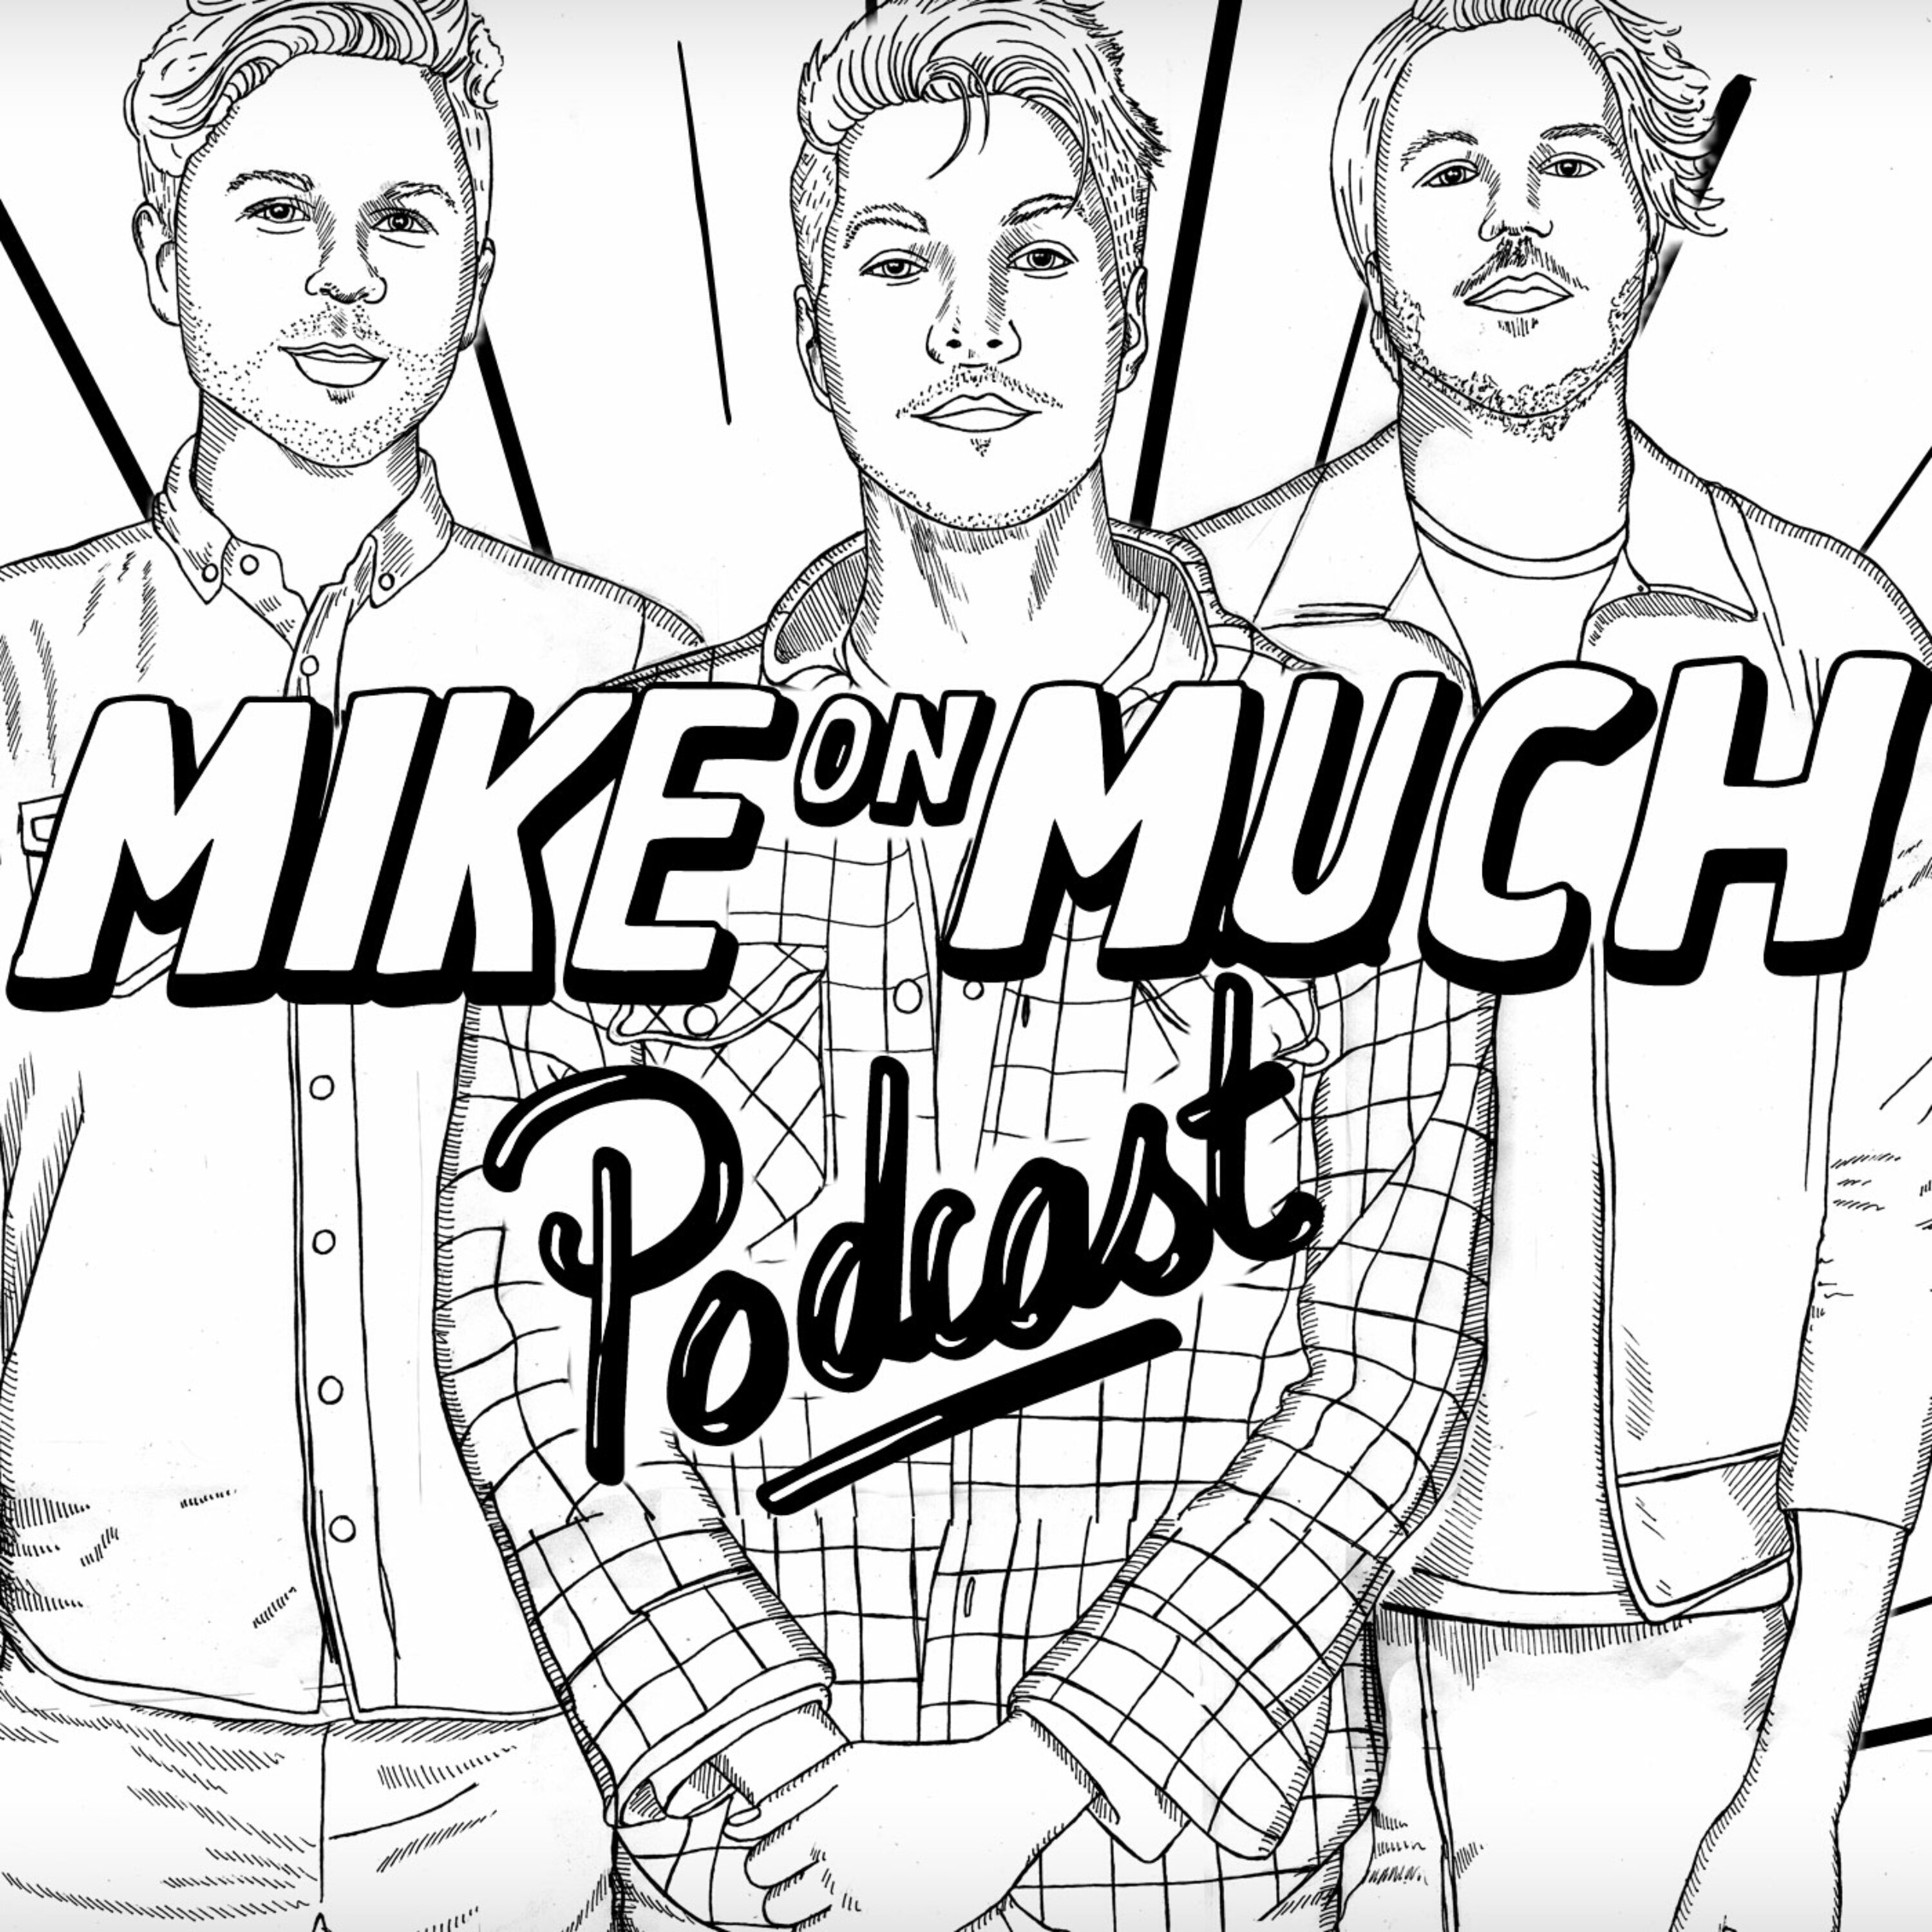 Season 1 Mike On Much: “Is It Just Me, Or Are The Beatles Not Funny People?”